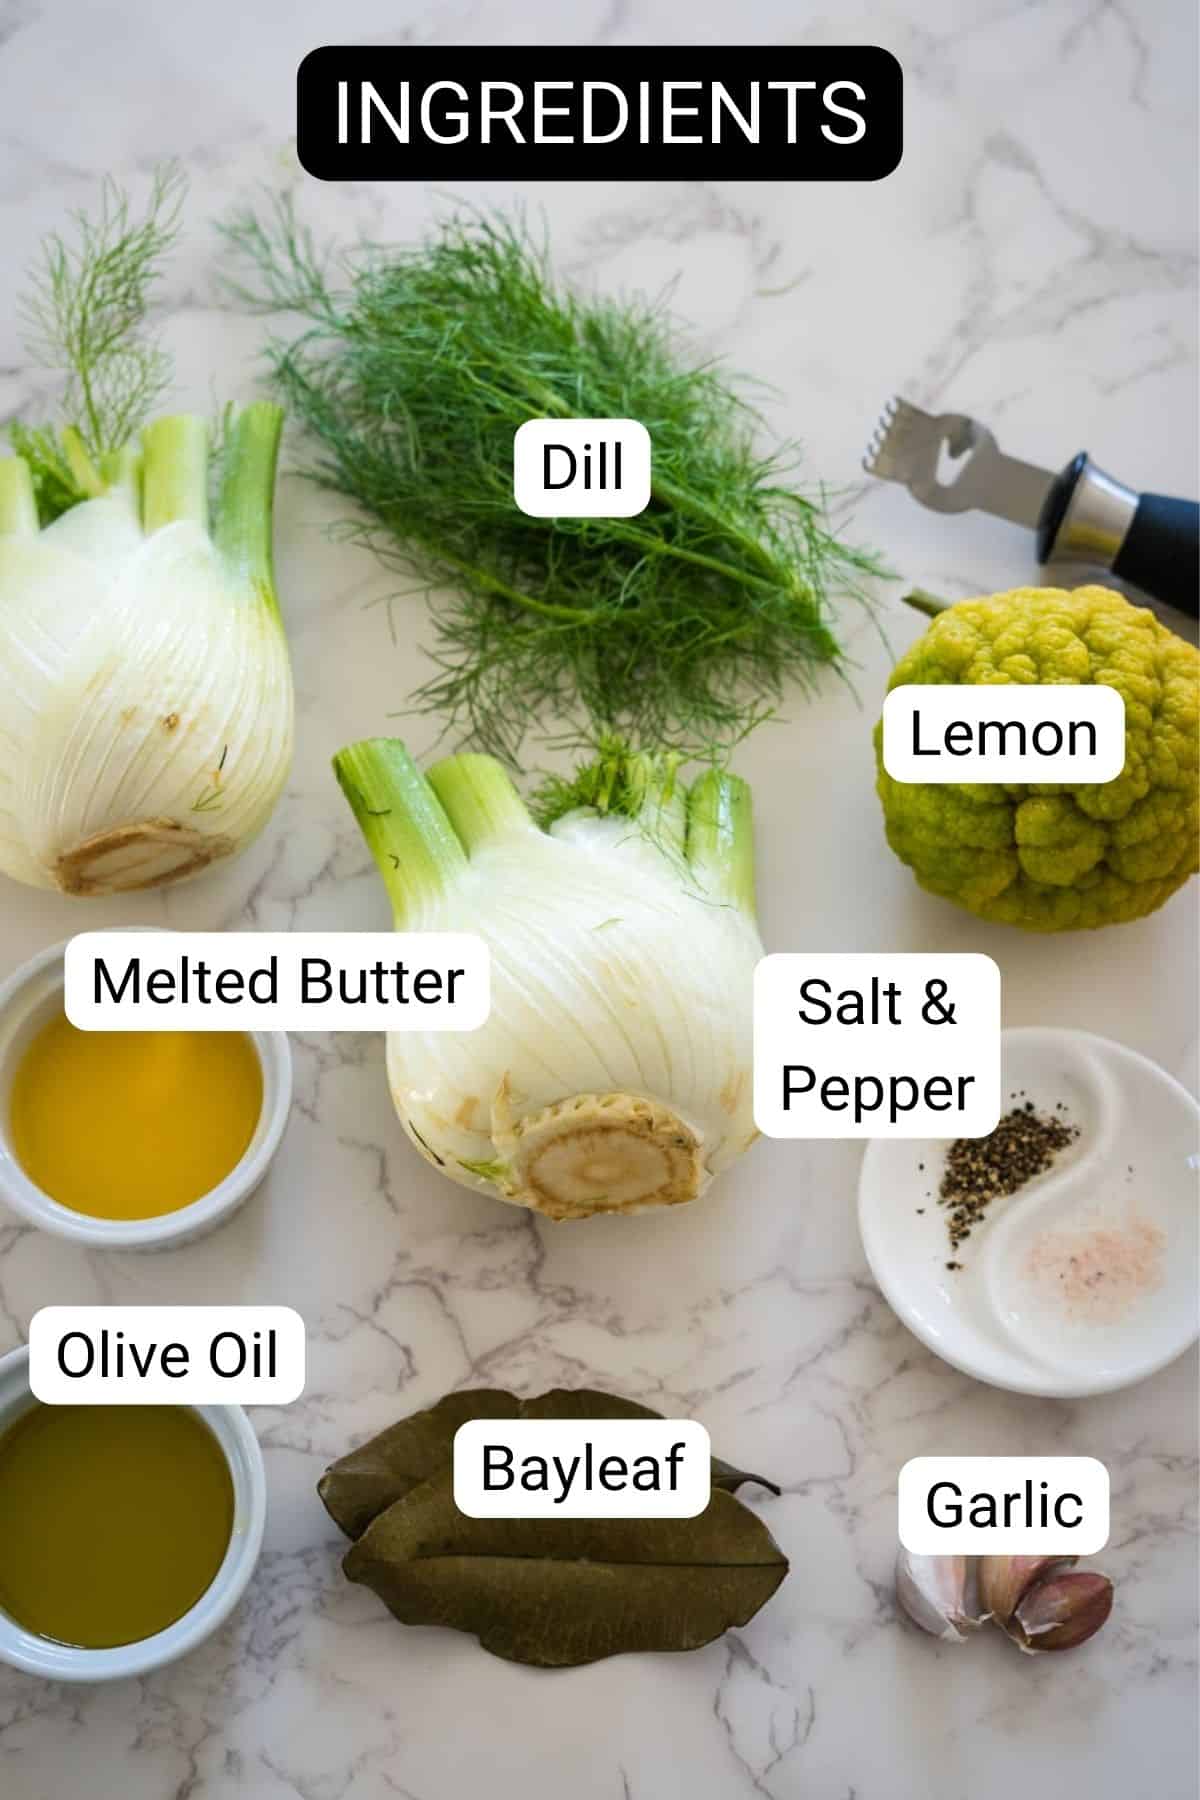 Various cooking ingredients labeled on a marble surface, including fennel confit, dill, lemon, melted butter, olive oil, bay leaves, salt and pepper, and garlic.